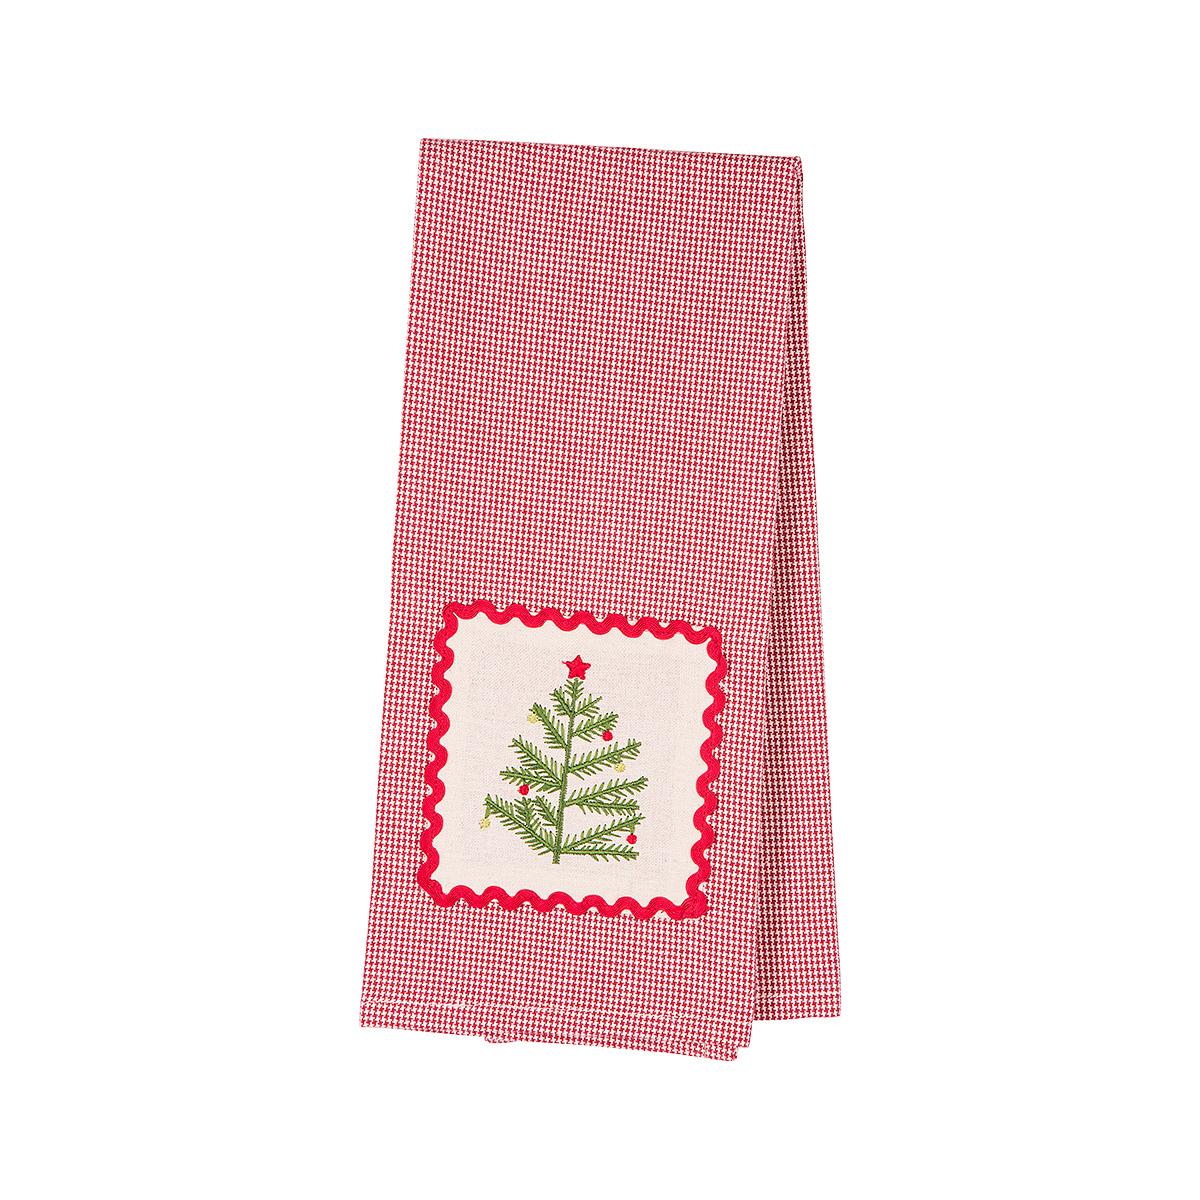  Embroidered Christmas Tree Kitchen Towel